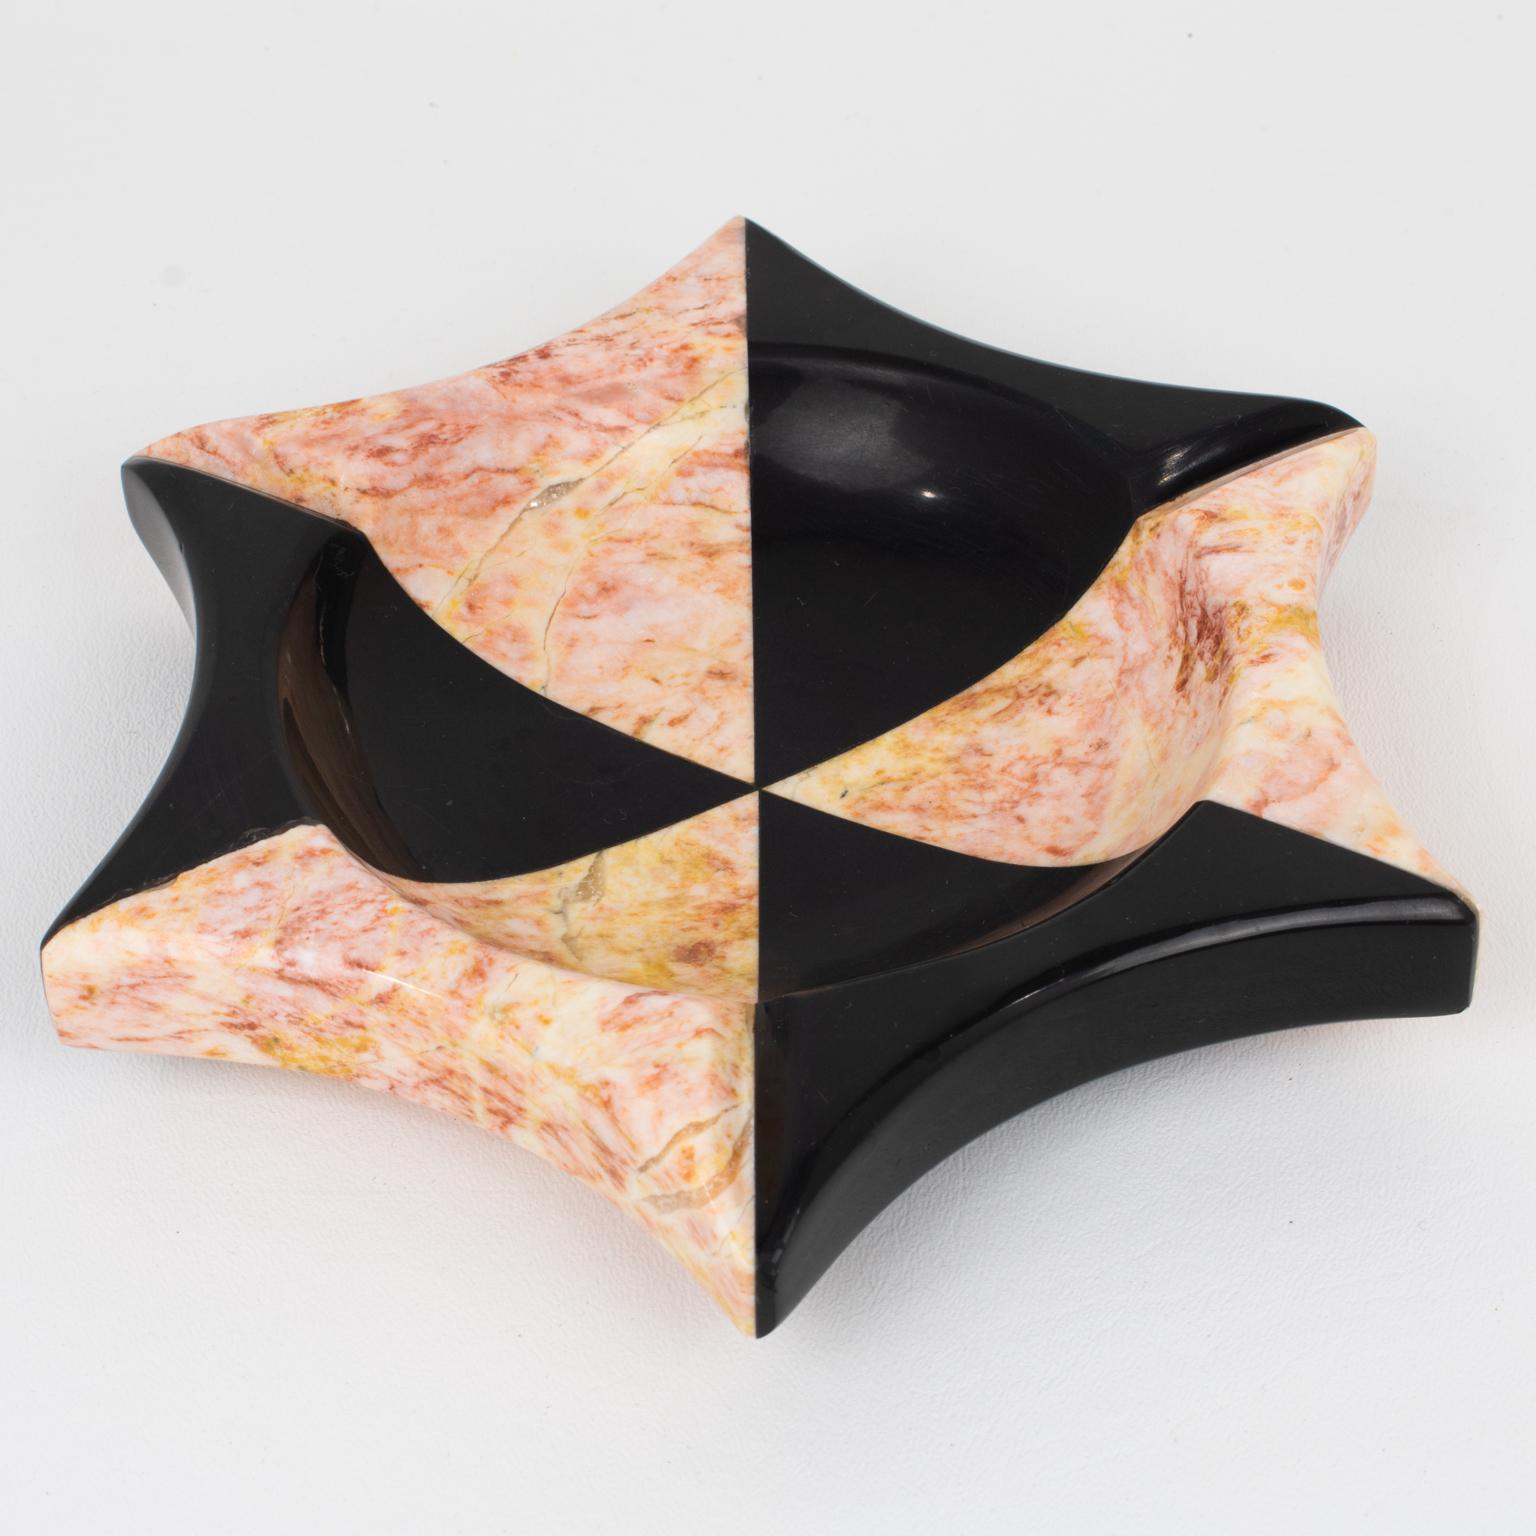 This is a substantial Mid-Century Italian modernist polished marble or onyx cigar ashtray, desk tidy, vide poche, or catchall crafted in the 1970s. This vessel or bowl features an extra thick marble slab with a star-shaped carved design in black and